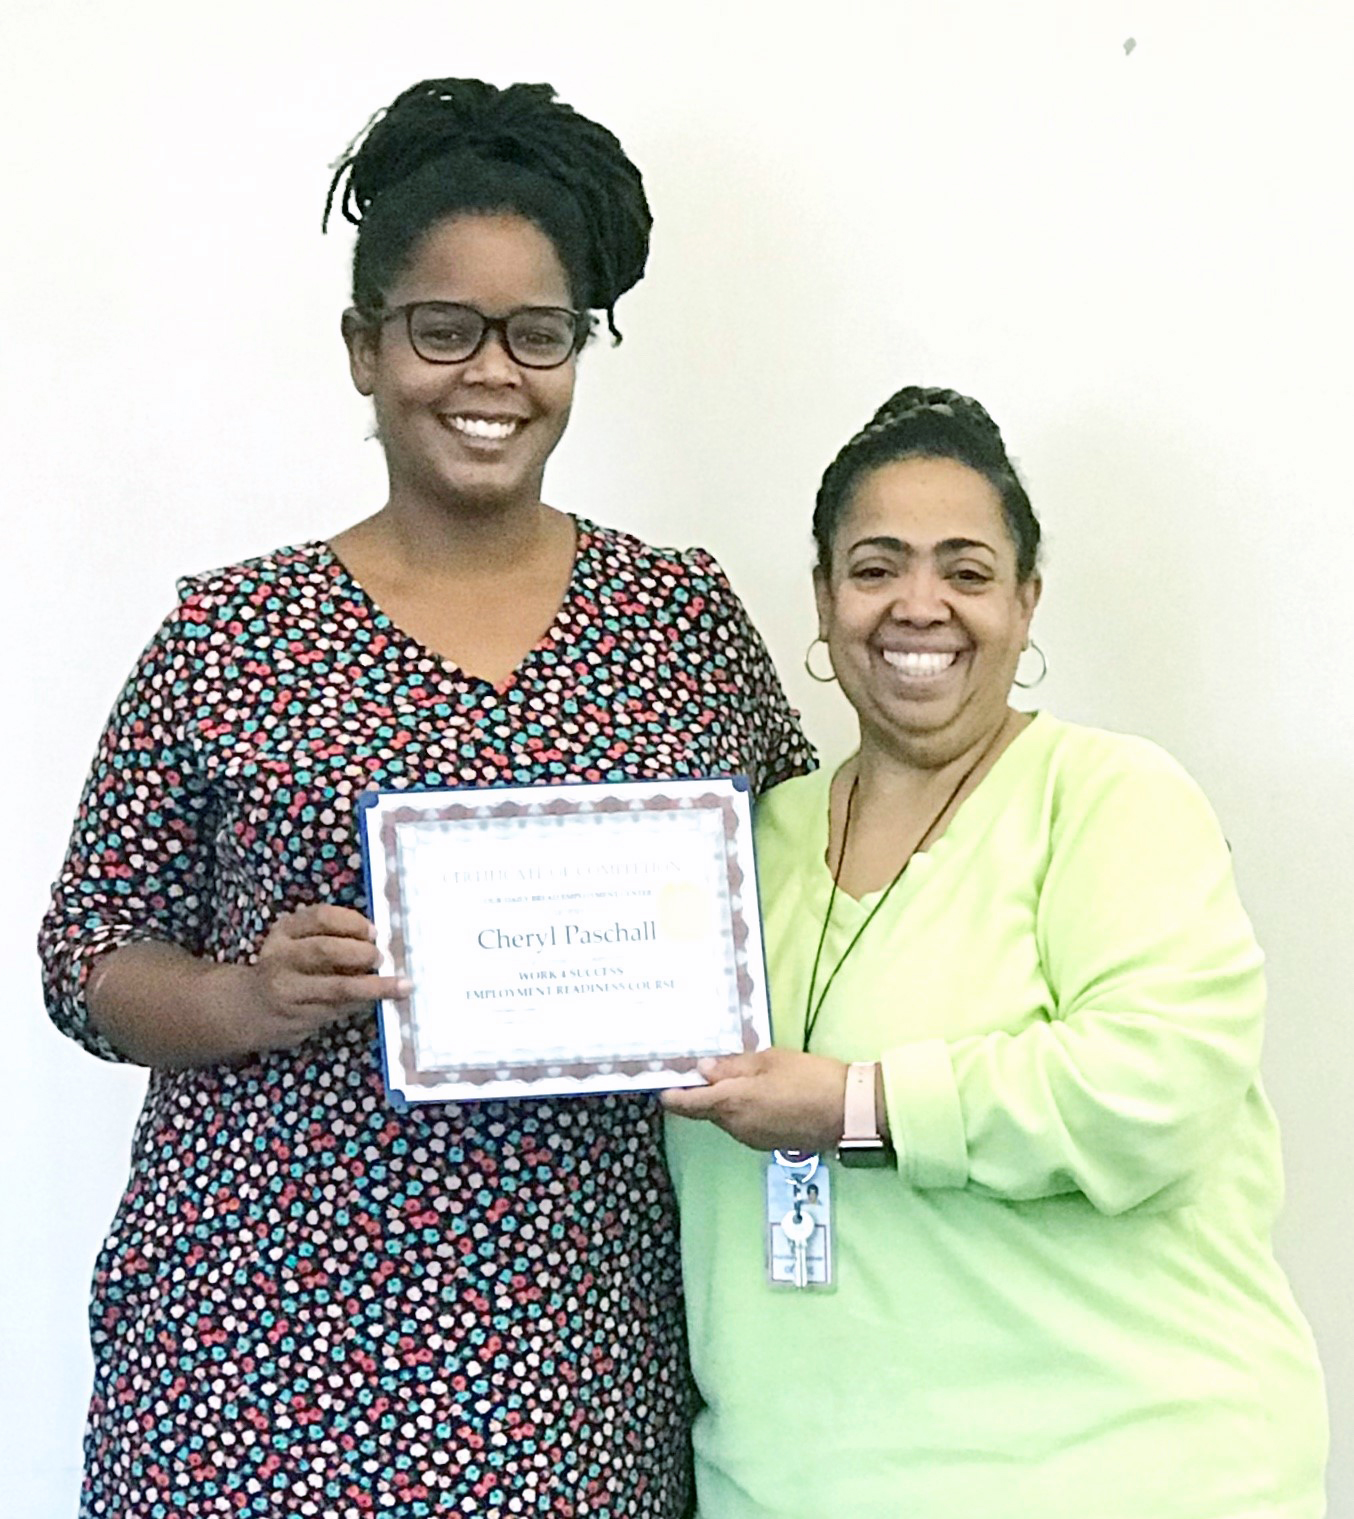 Cheryl Paschall (l) with Our Daily Bread Job Readiness Trainer Darlene Dunn